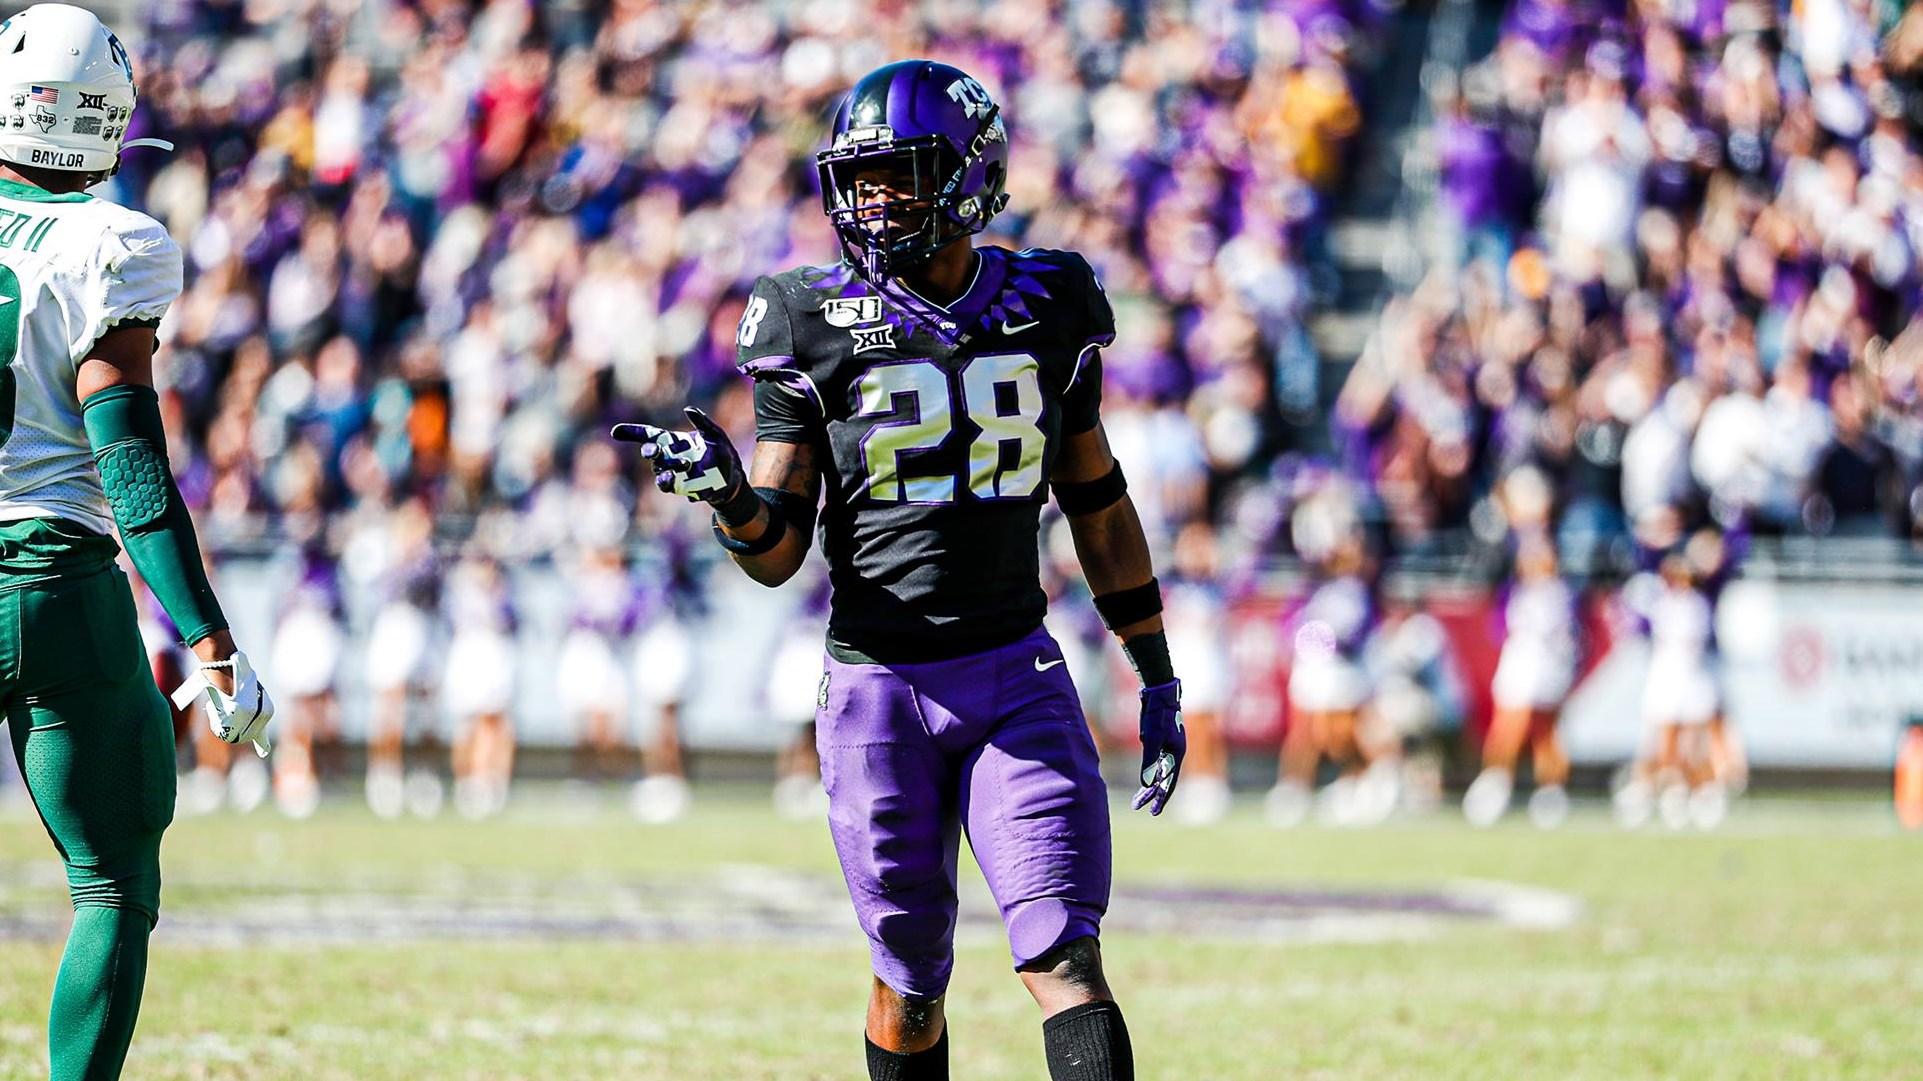 Millard "Nook" Bradford is an explosive defensive back out of TCU. He is a well-disciplined tackler who's solid against the run. Senior Hula Bowl scout Mike Bey breaks down Bradford as an NFL Prospect in his report.